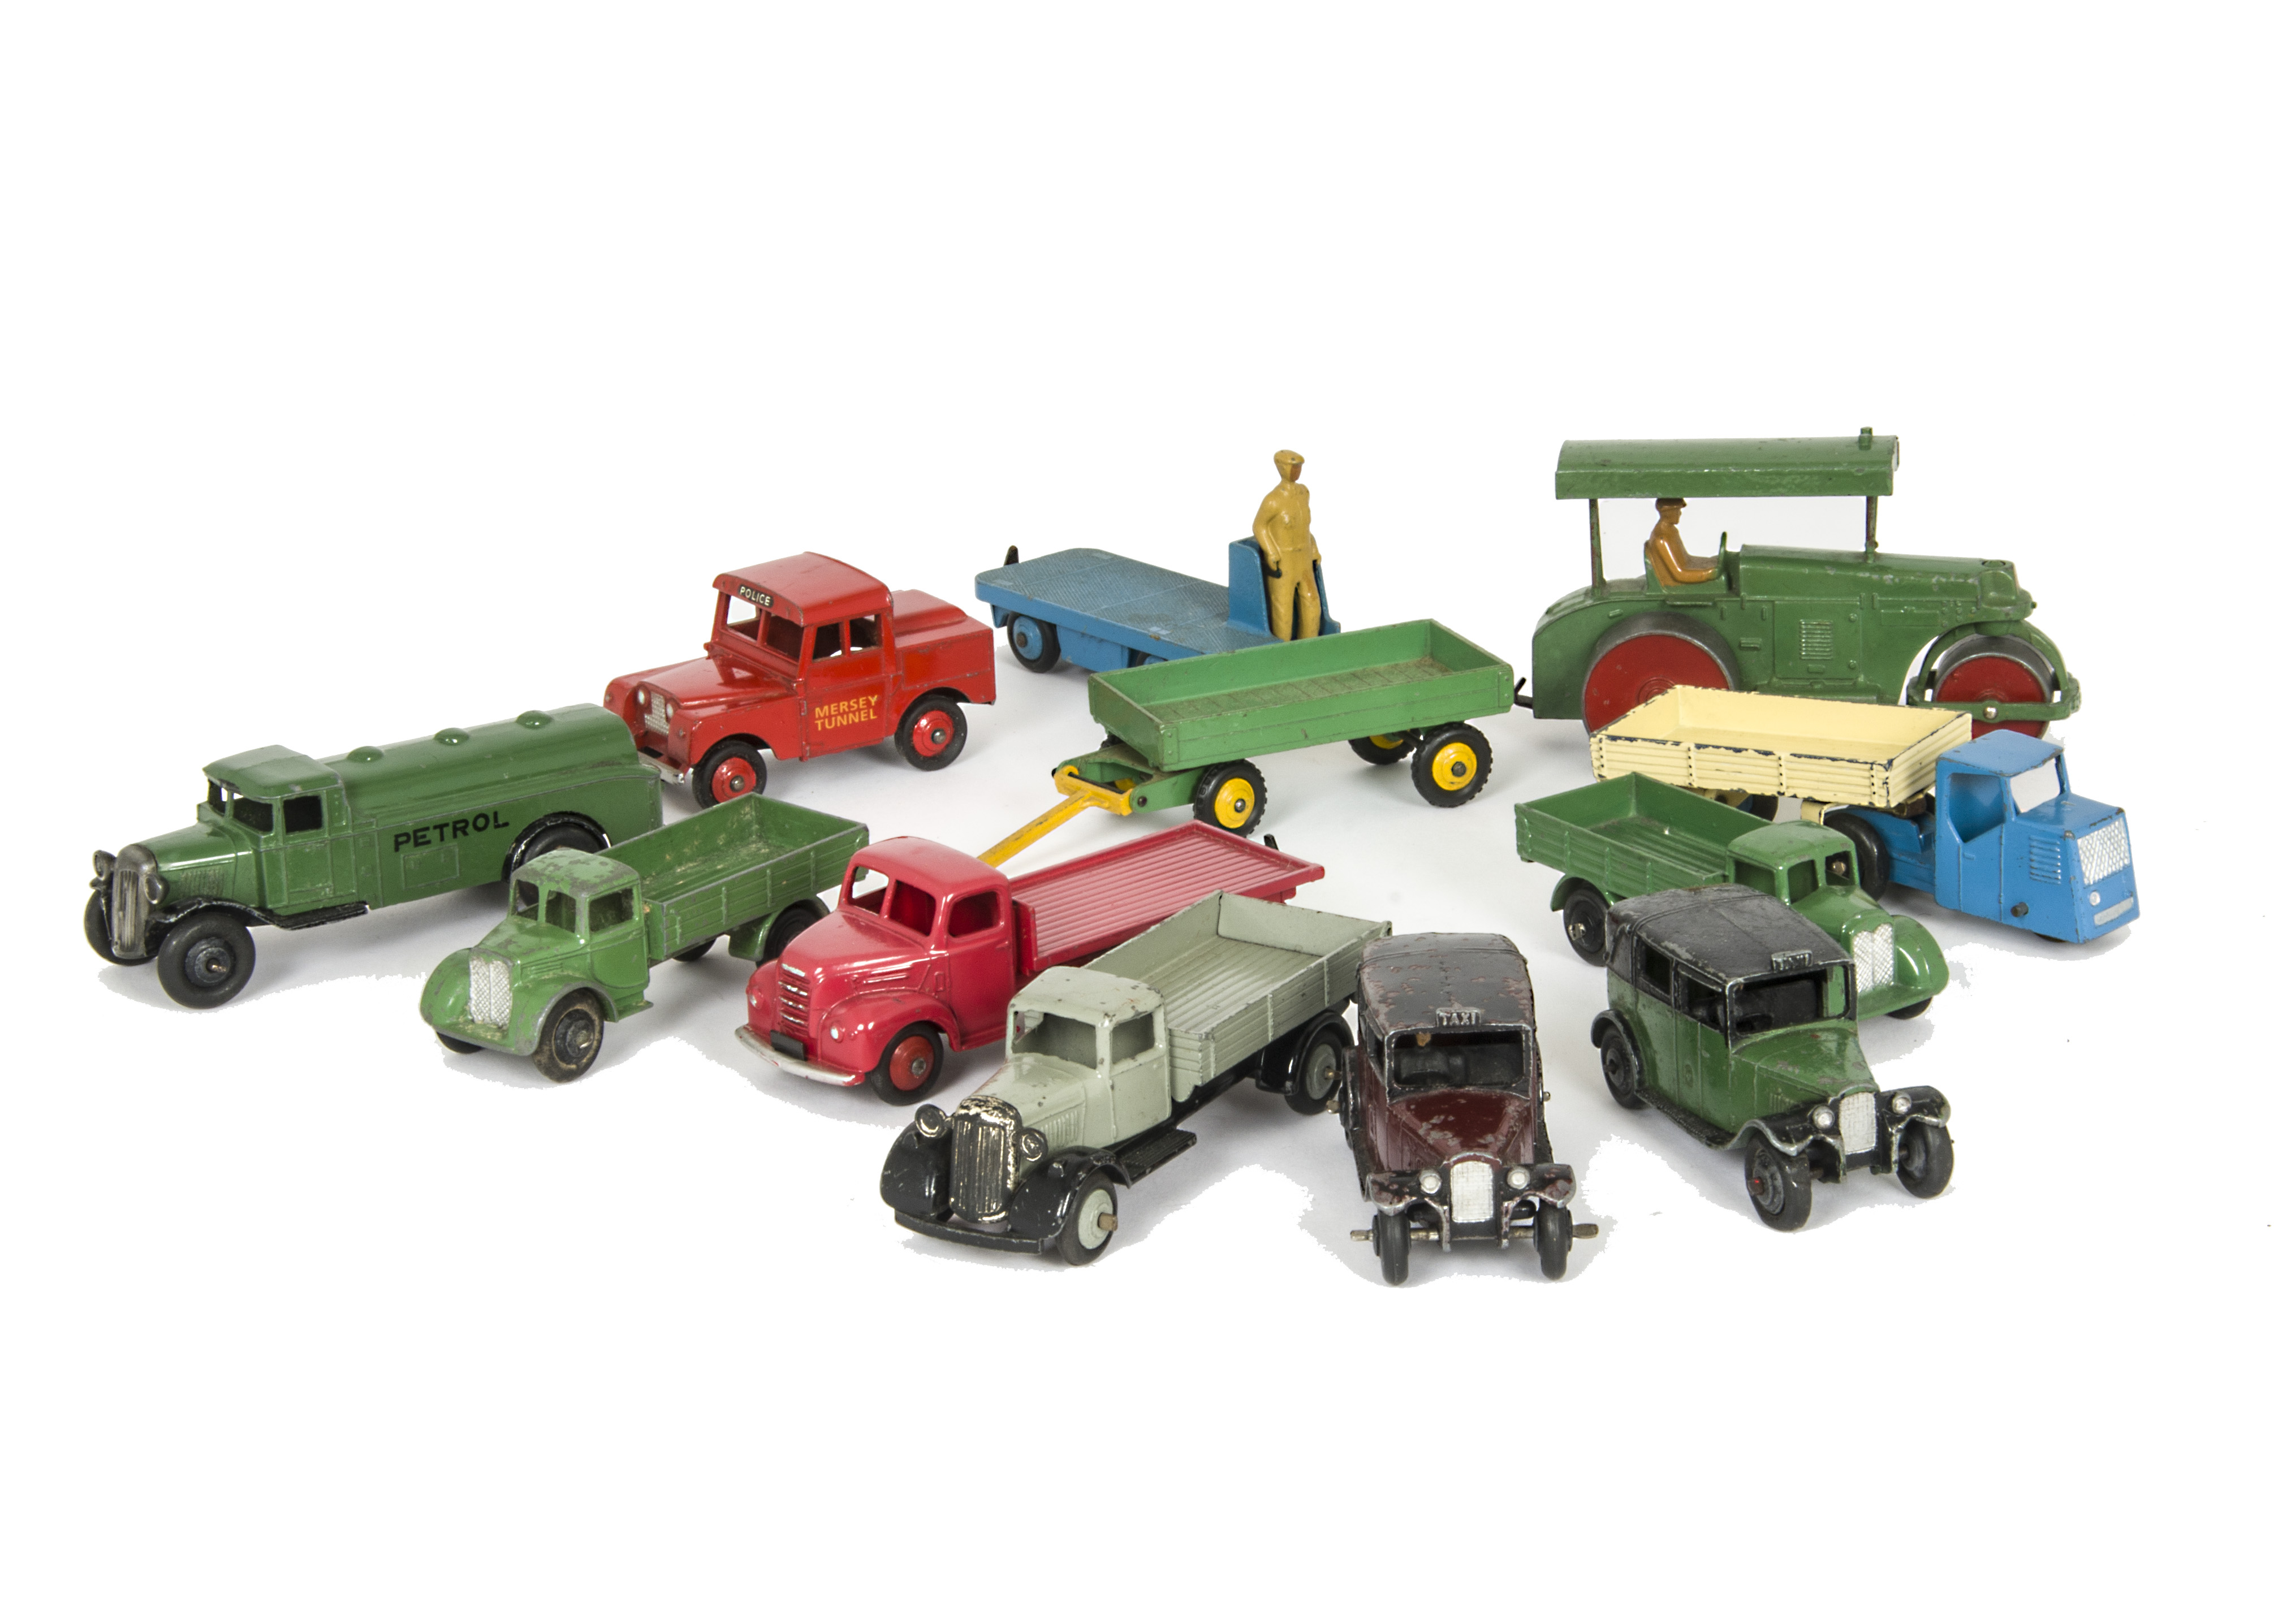 Loose Dinky Toy Small Commercials, including 422 Fordson Flat Truck, 14a B.E.V Truck, 255 Mersey